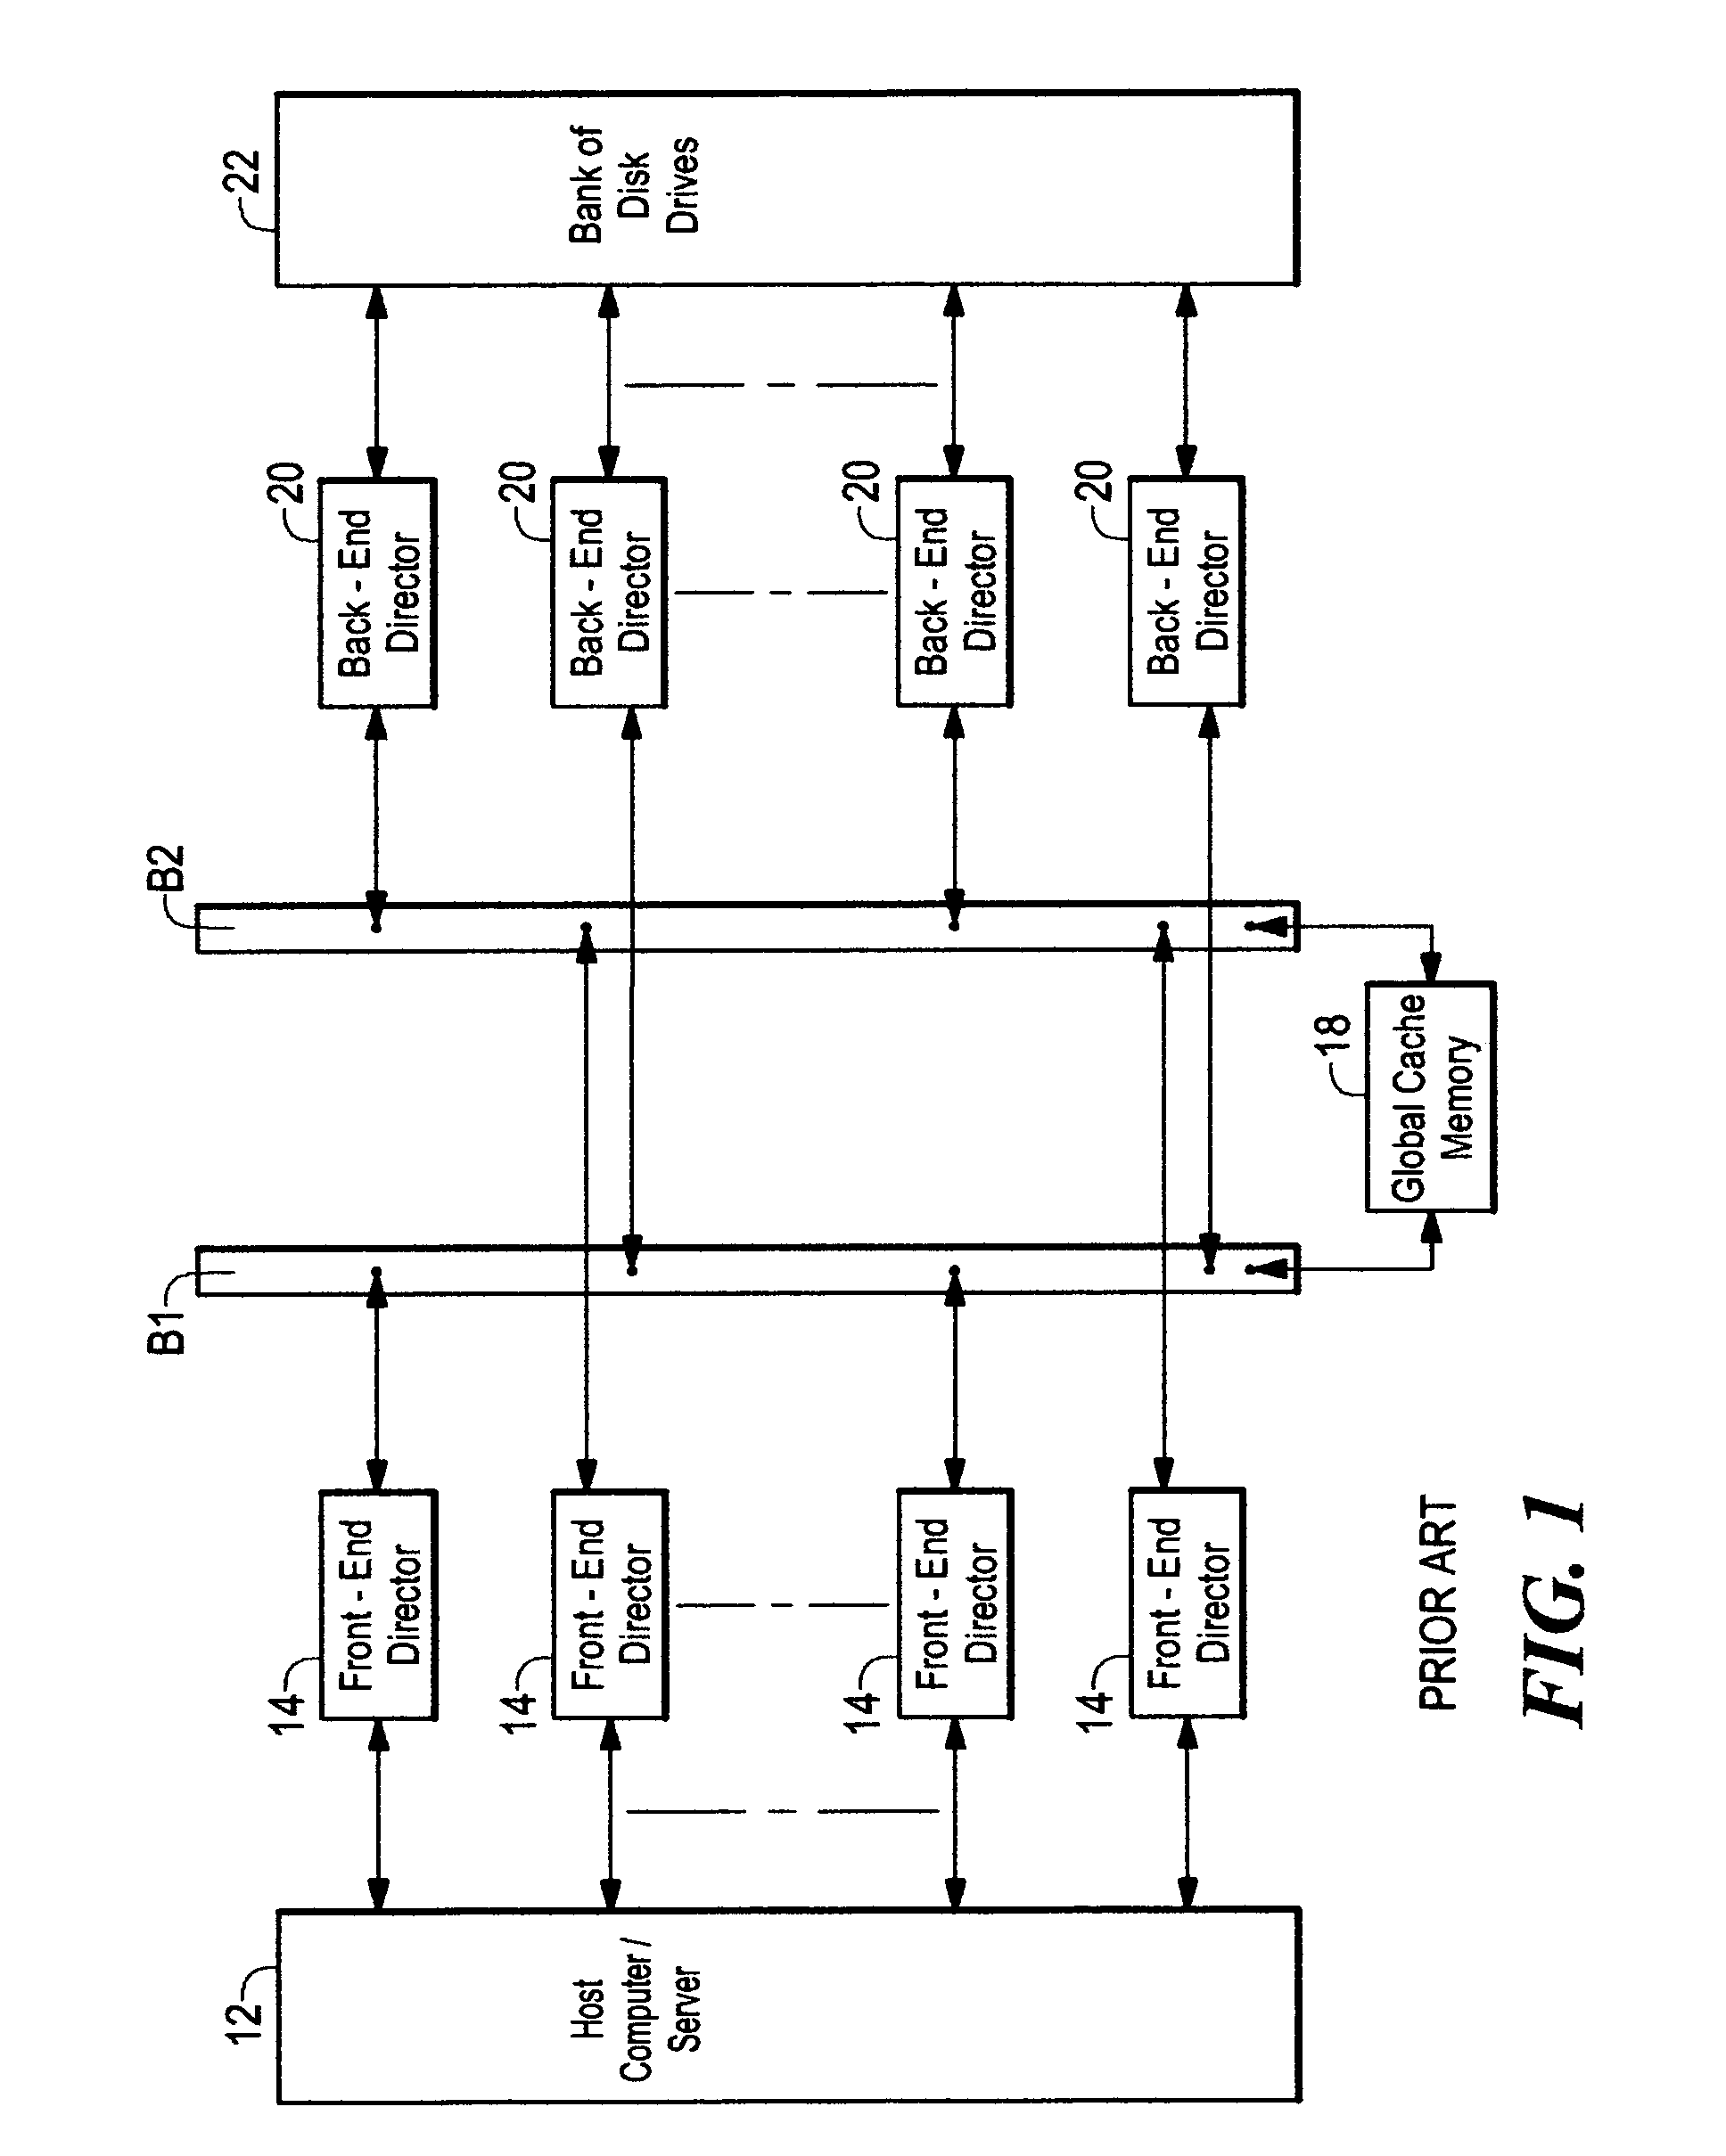 Data storage system having point-to-point configuration